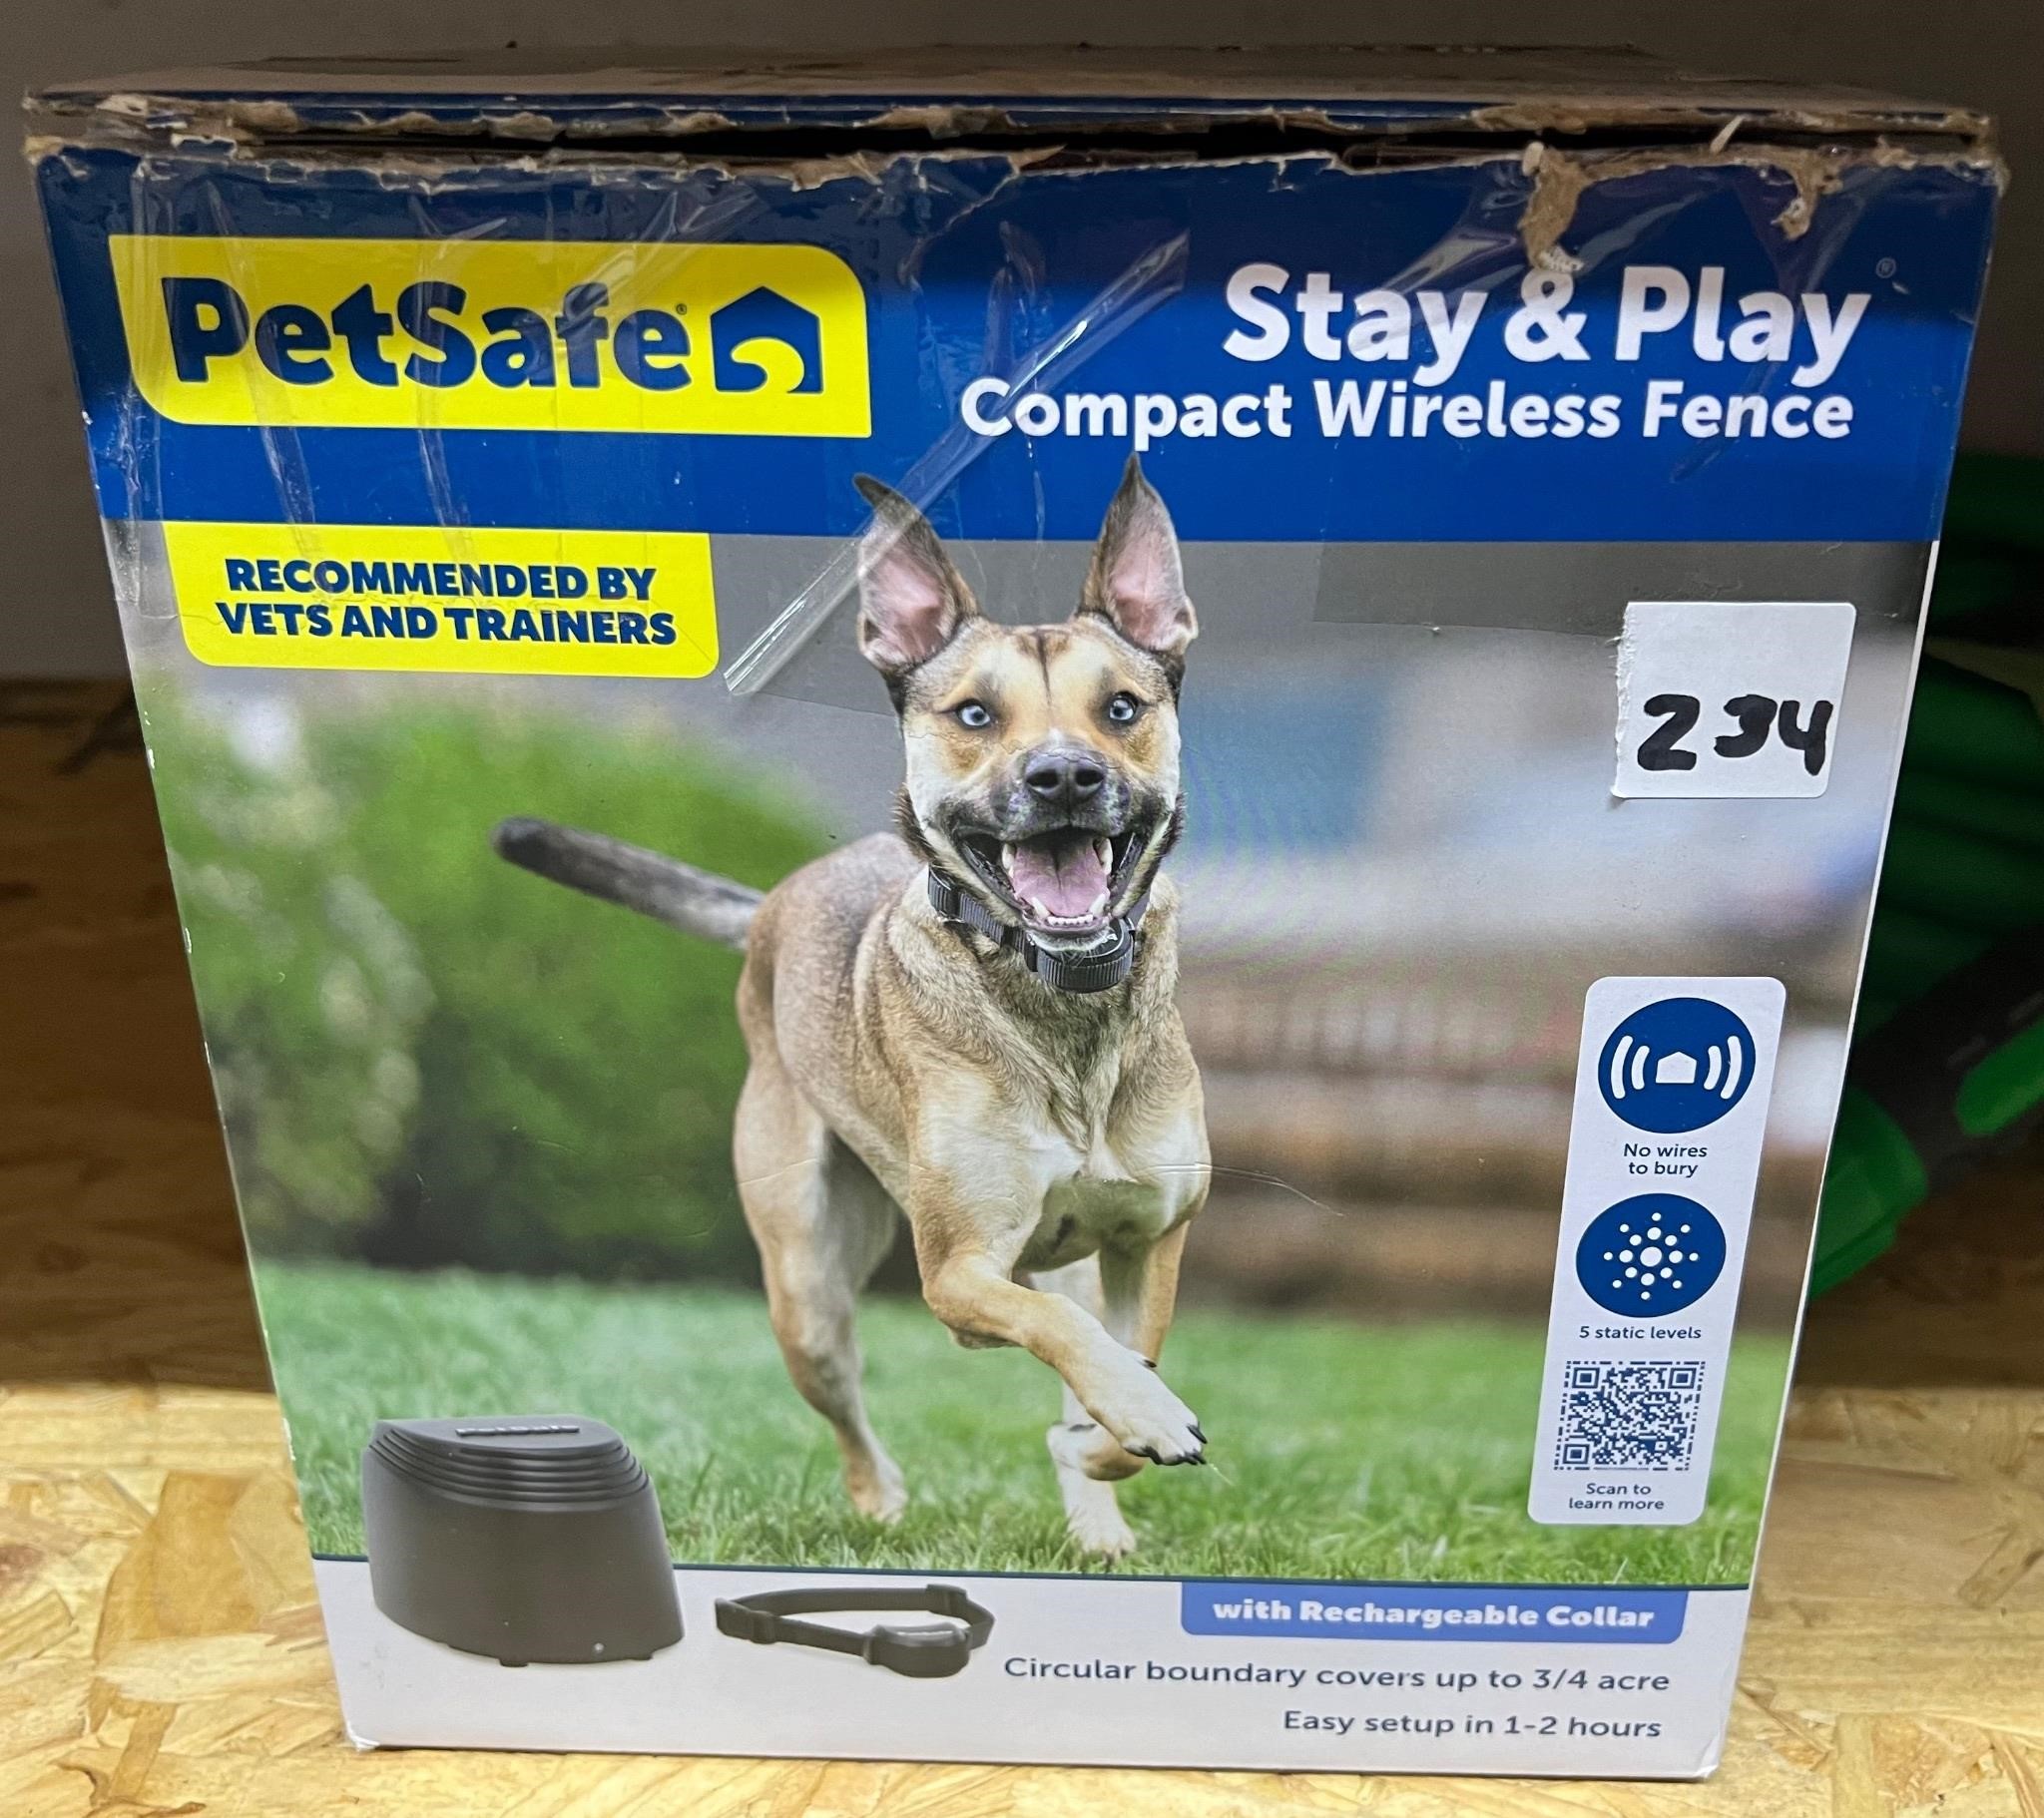 PetSafeStay&PlayCompactWirelessFence,up to 3/4acre